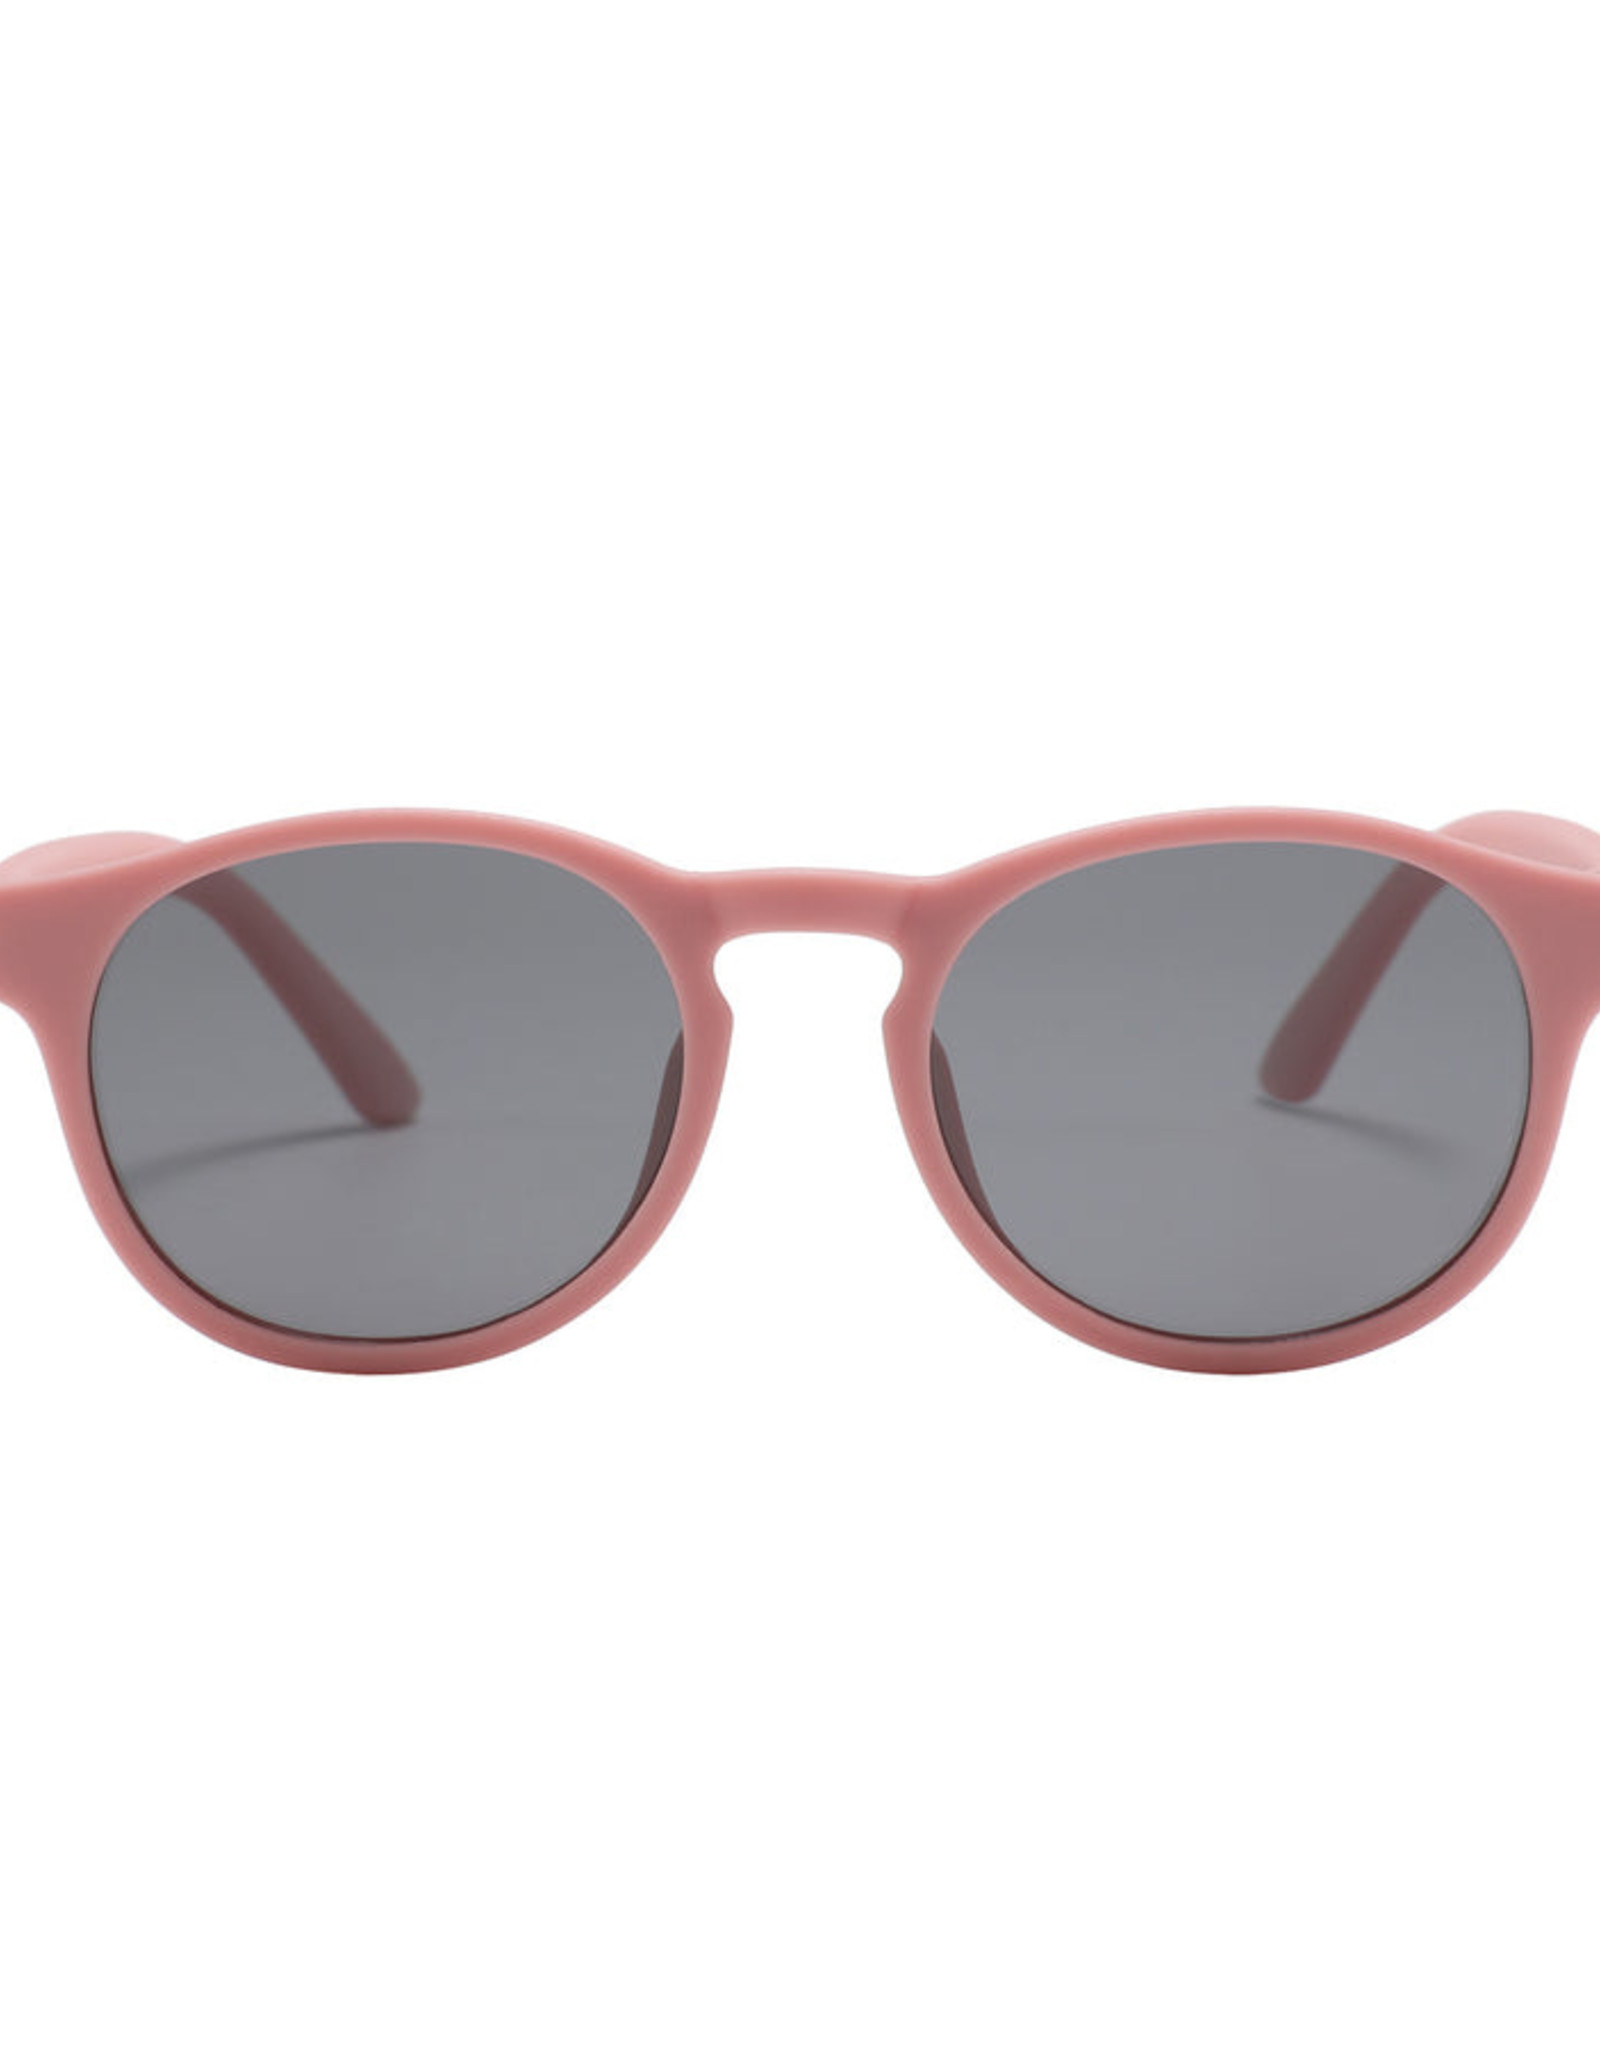 Current Tyed SP23 Keyhole Sunnies